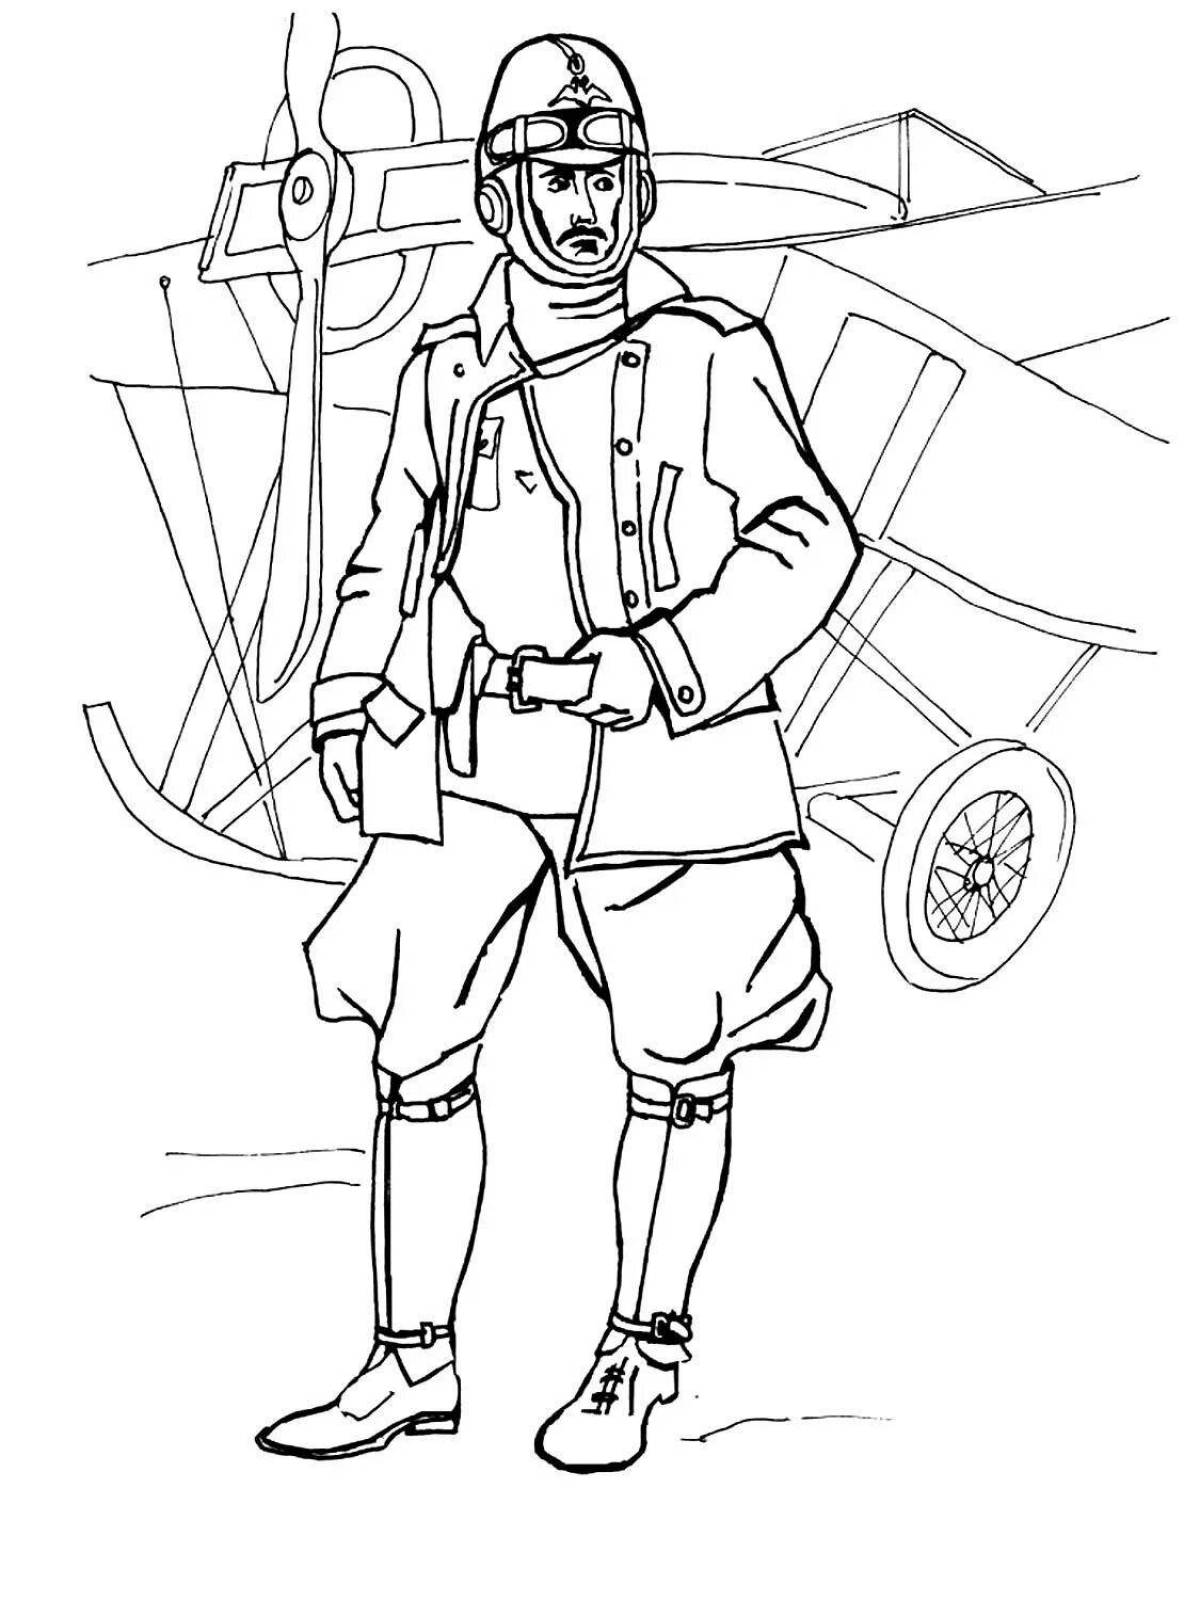 Playful military pilot coloring page for kids